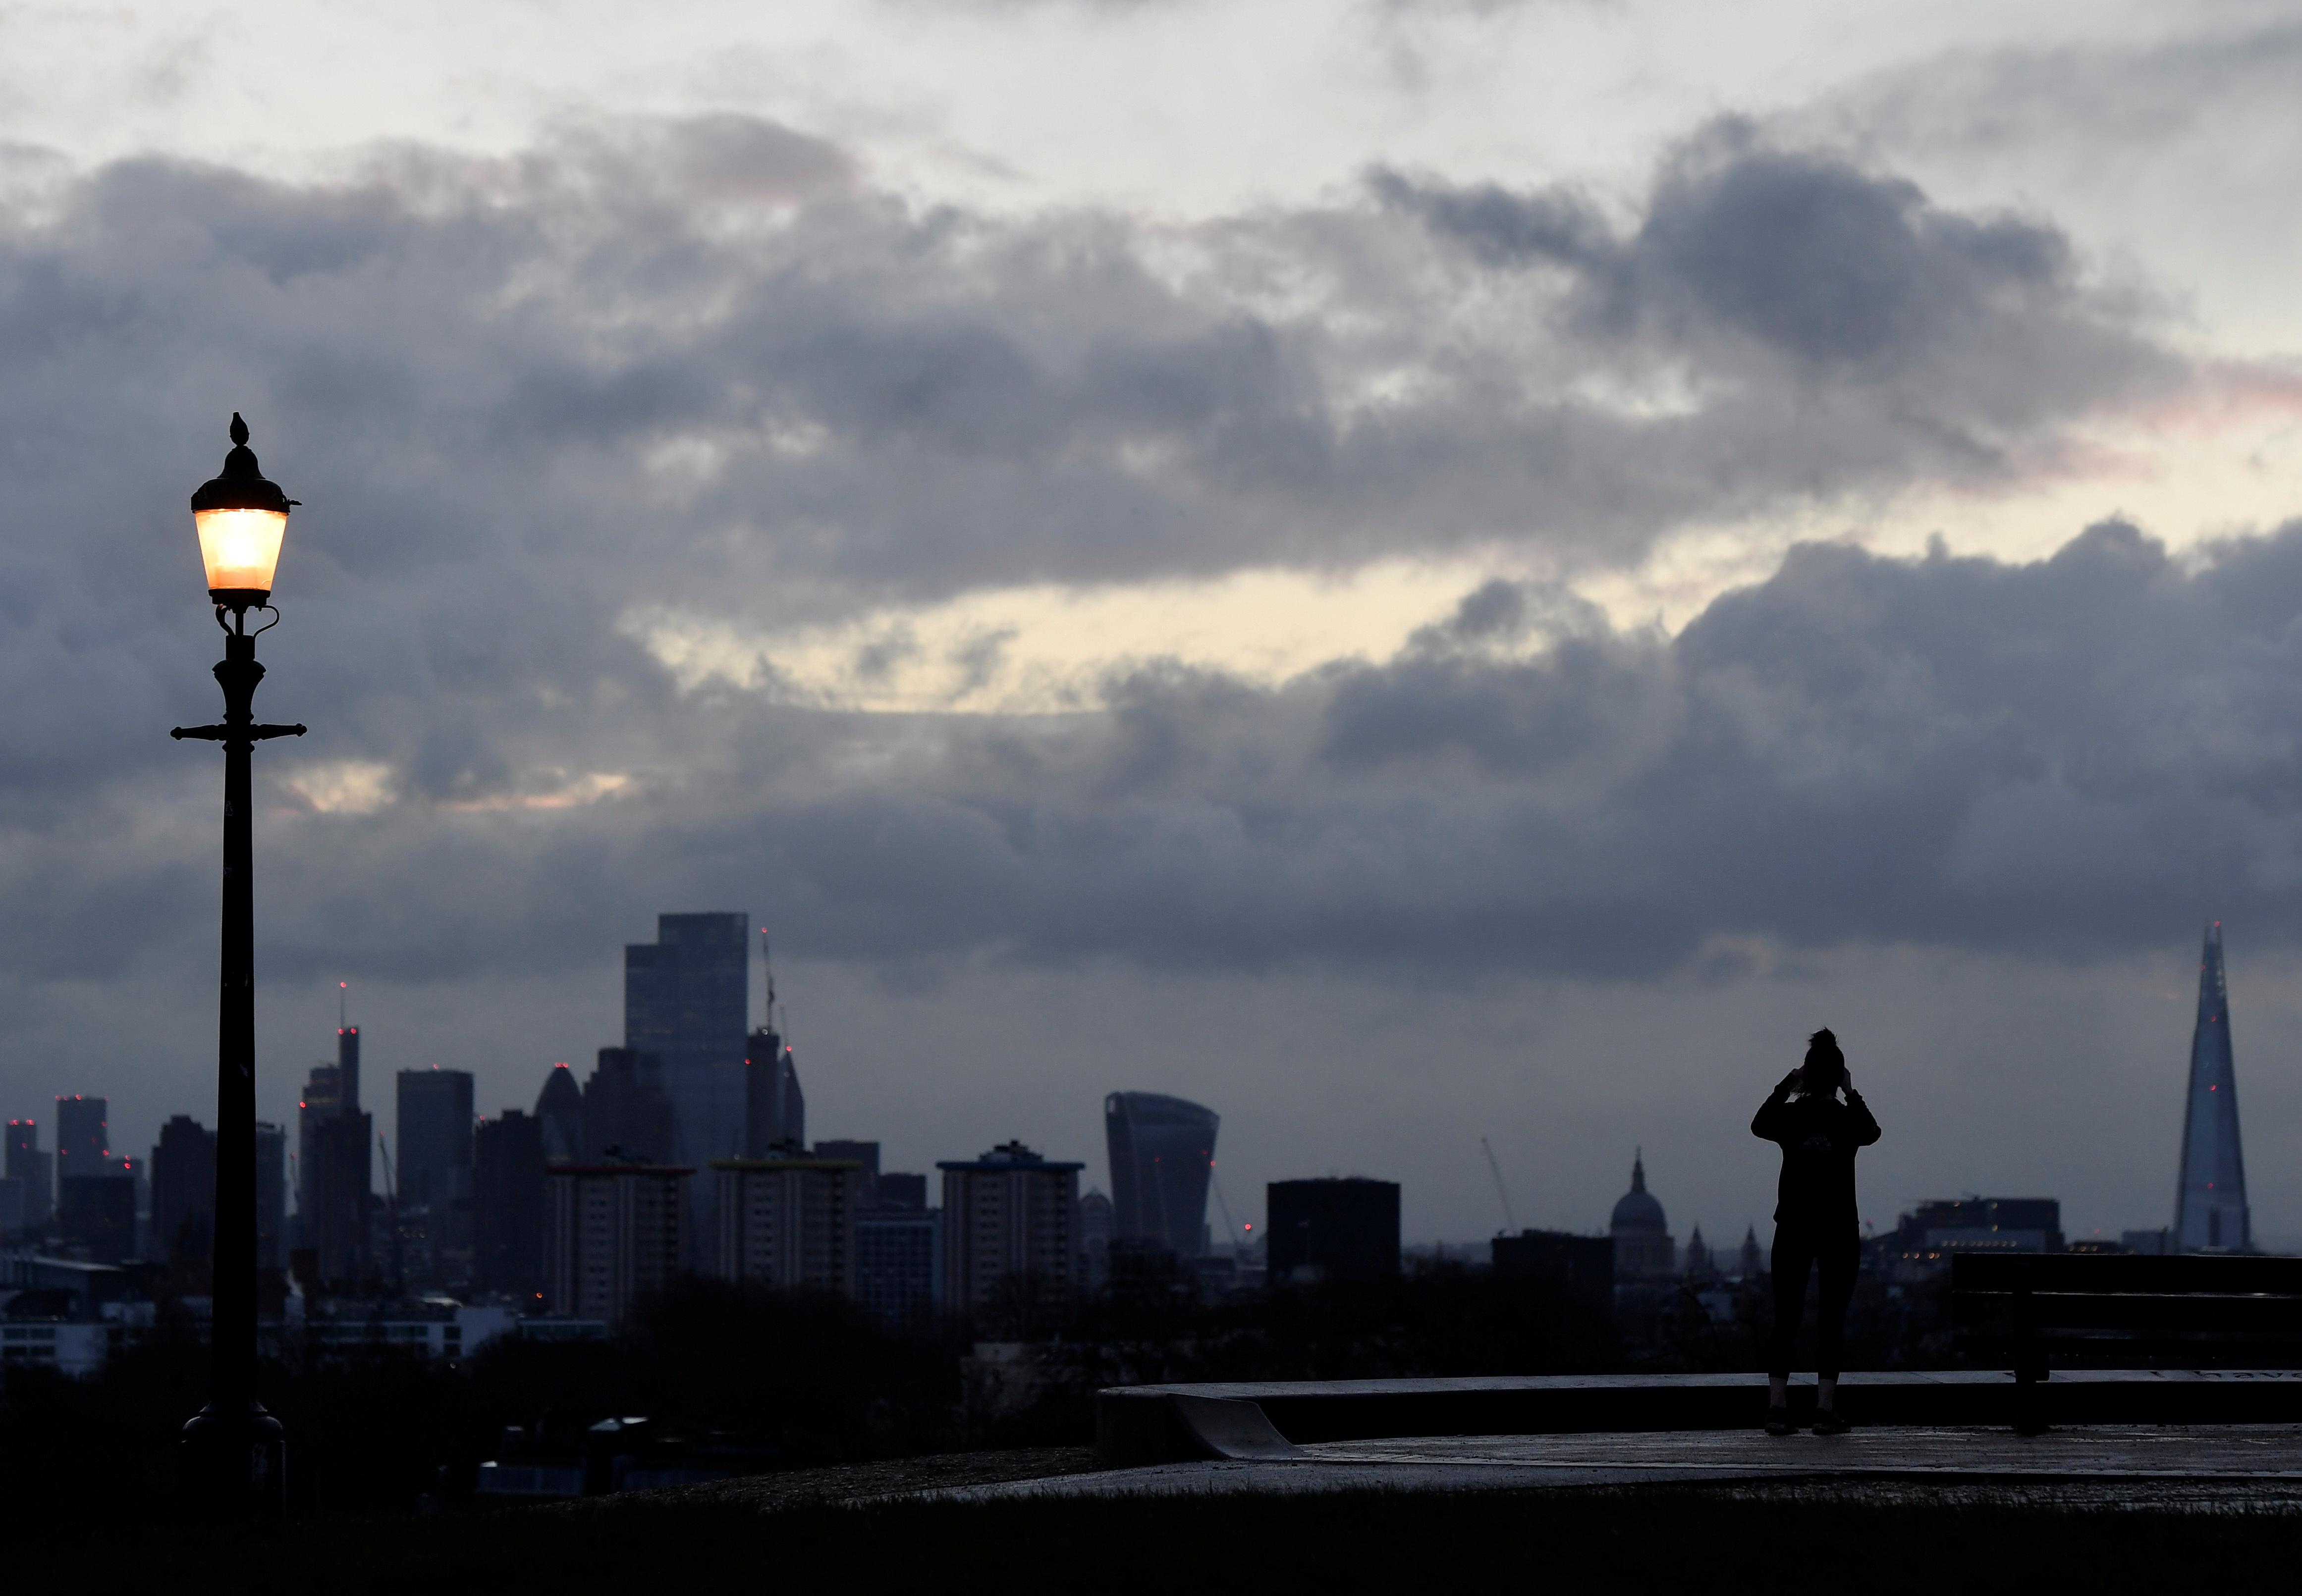 A person takes images of the city skyline at dawn from Primrose Hill, London